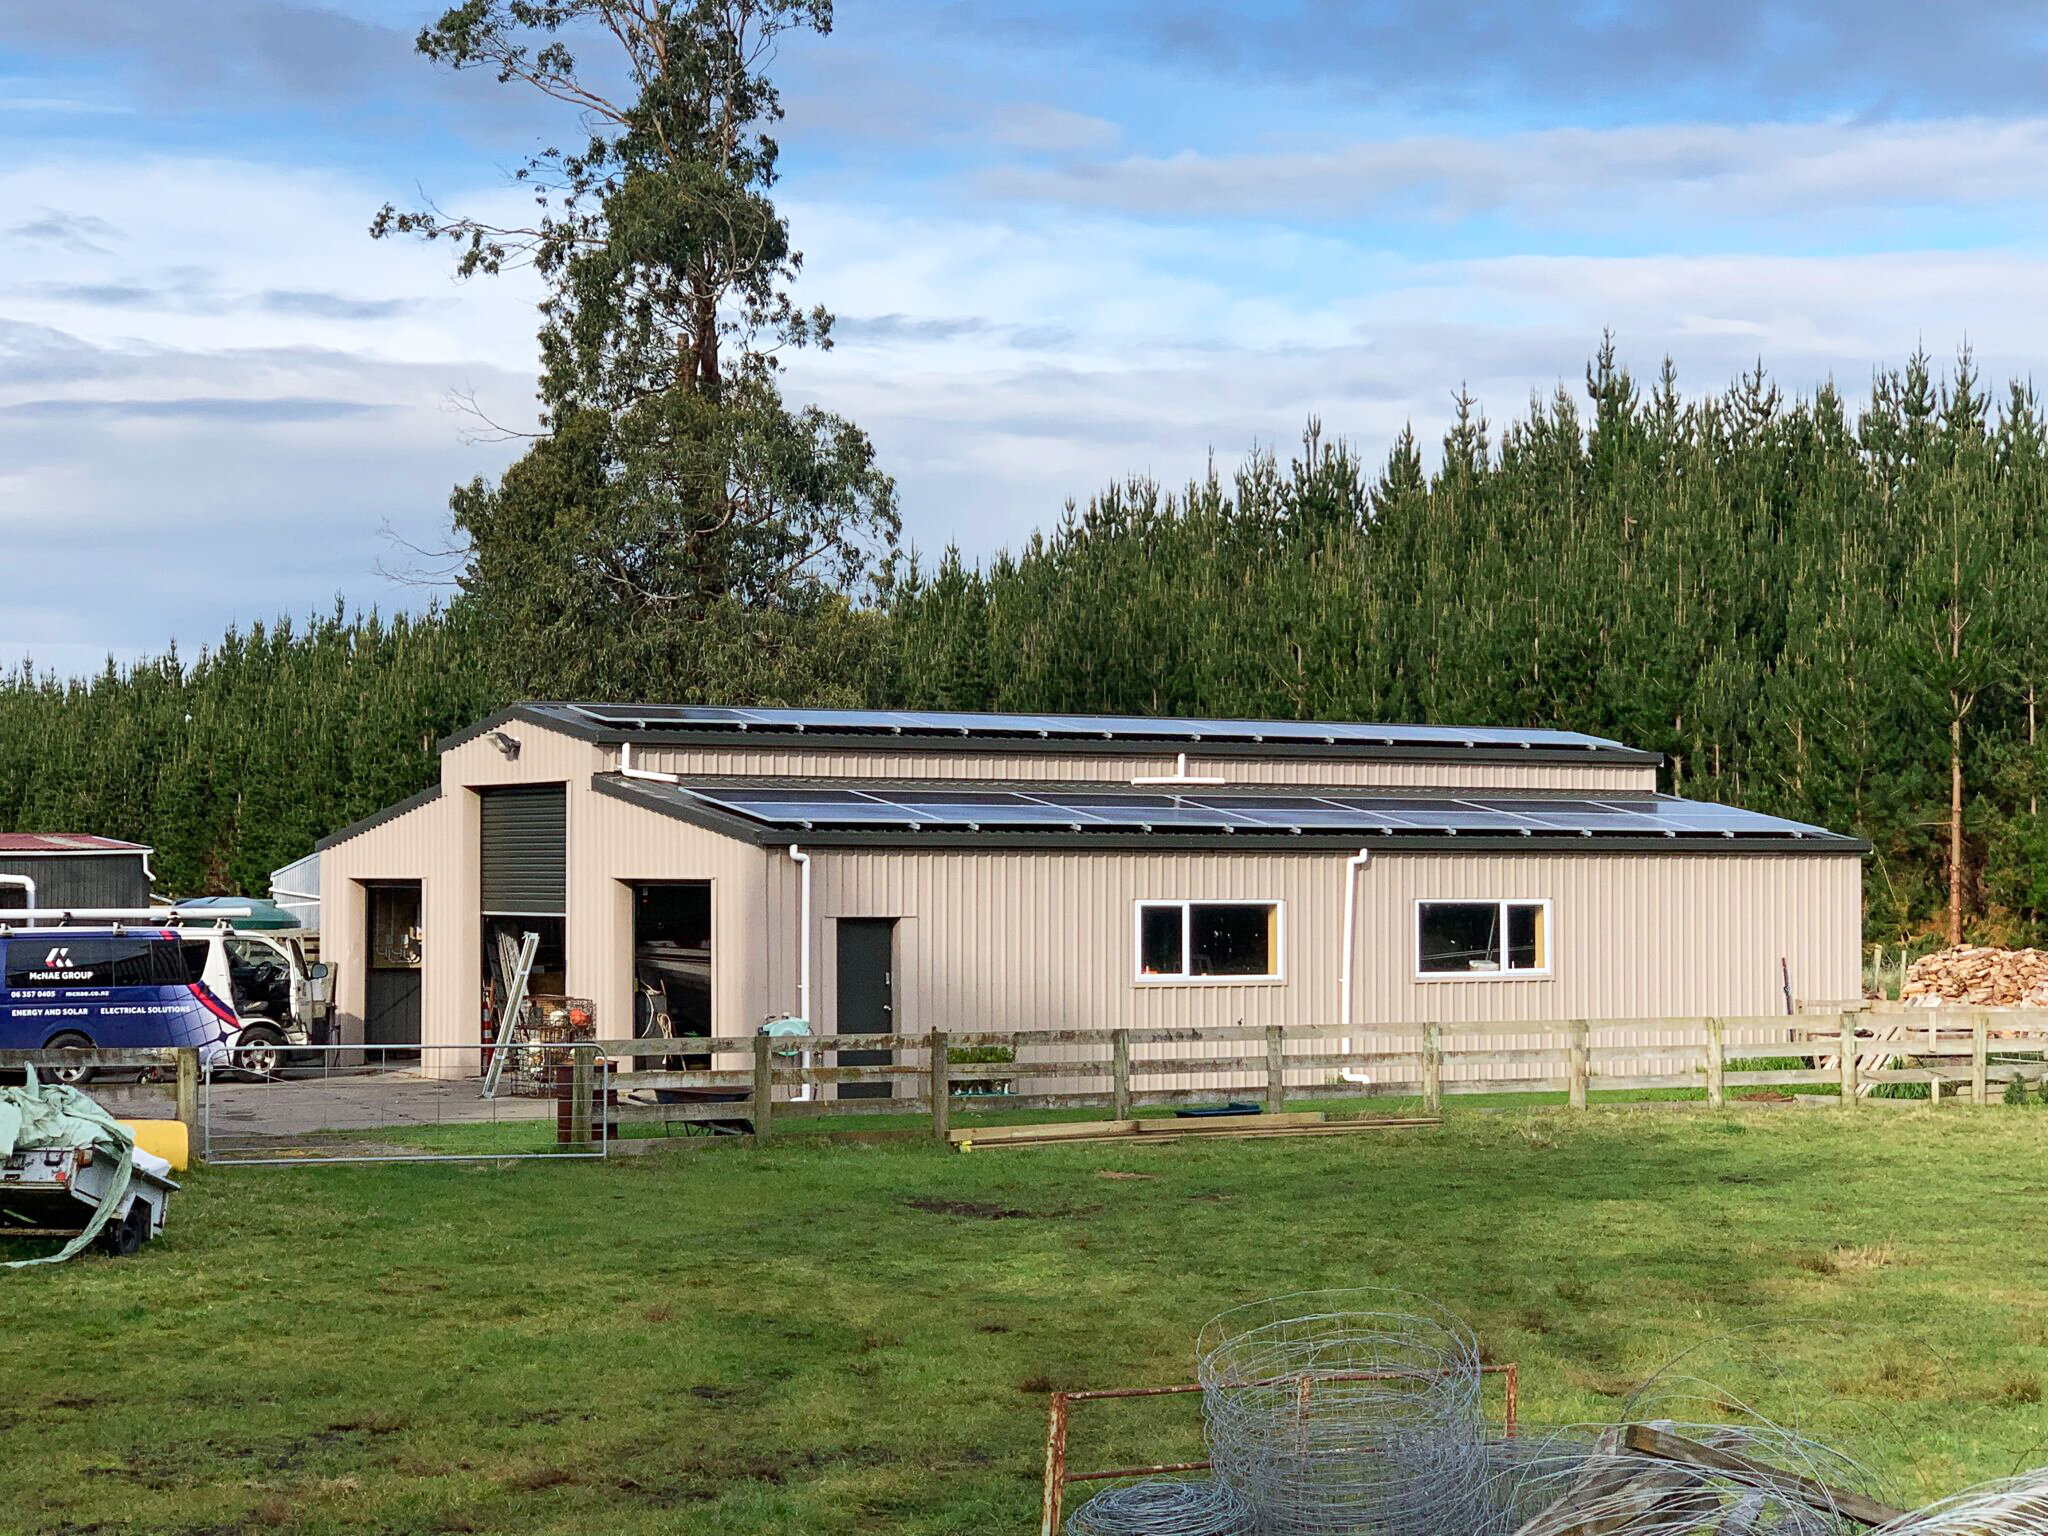 Isn't she a beauty? ✨ 

A perfect solar installation on a perfect day in the Manawatū.

#solar #solarpanels #solarpower #manawatū #residential #cleanenergy #mcnaegroup #sustainable #commercial #solarenergy #renewableenergy #energysolutions